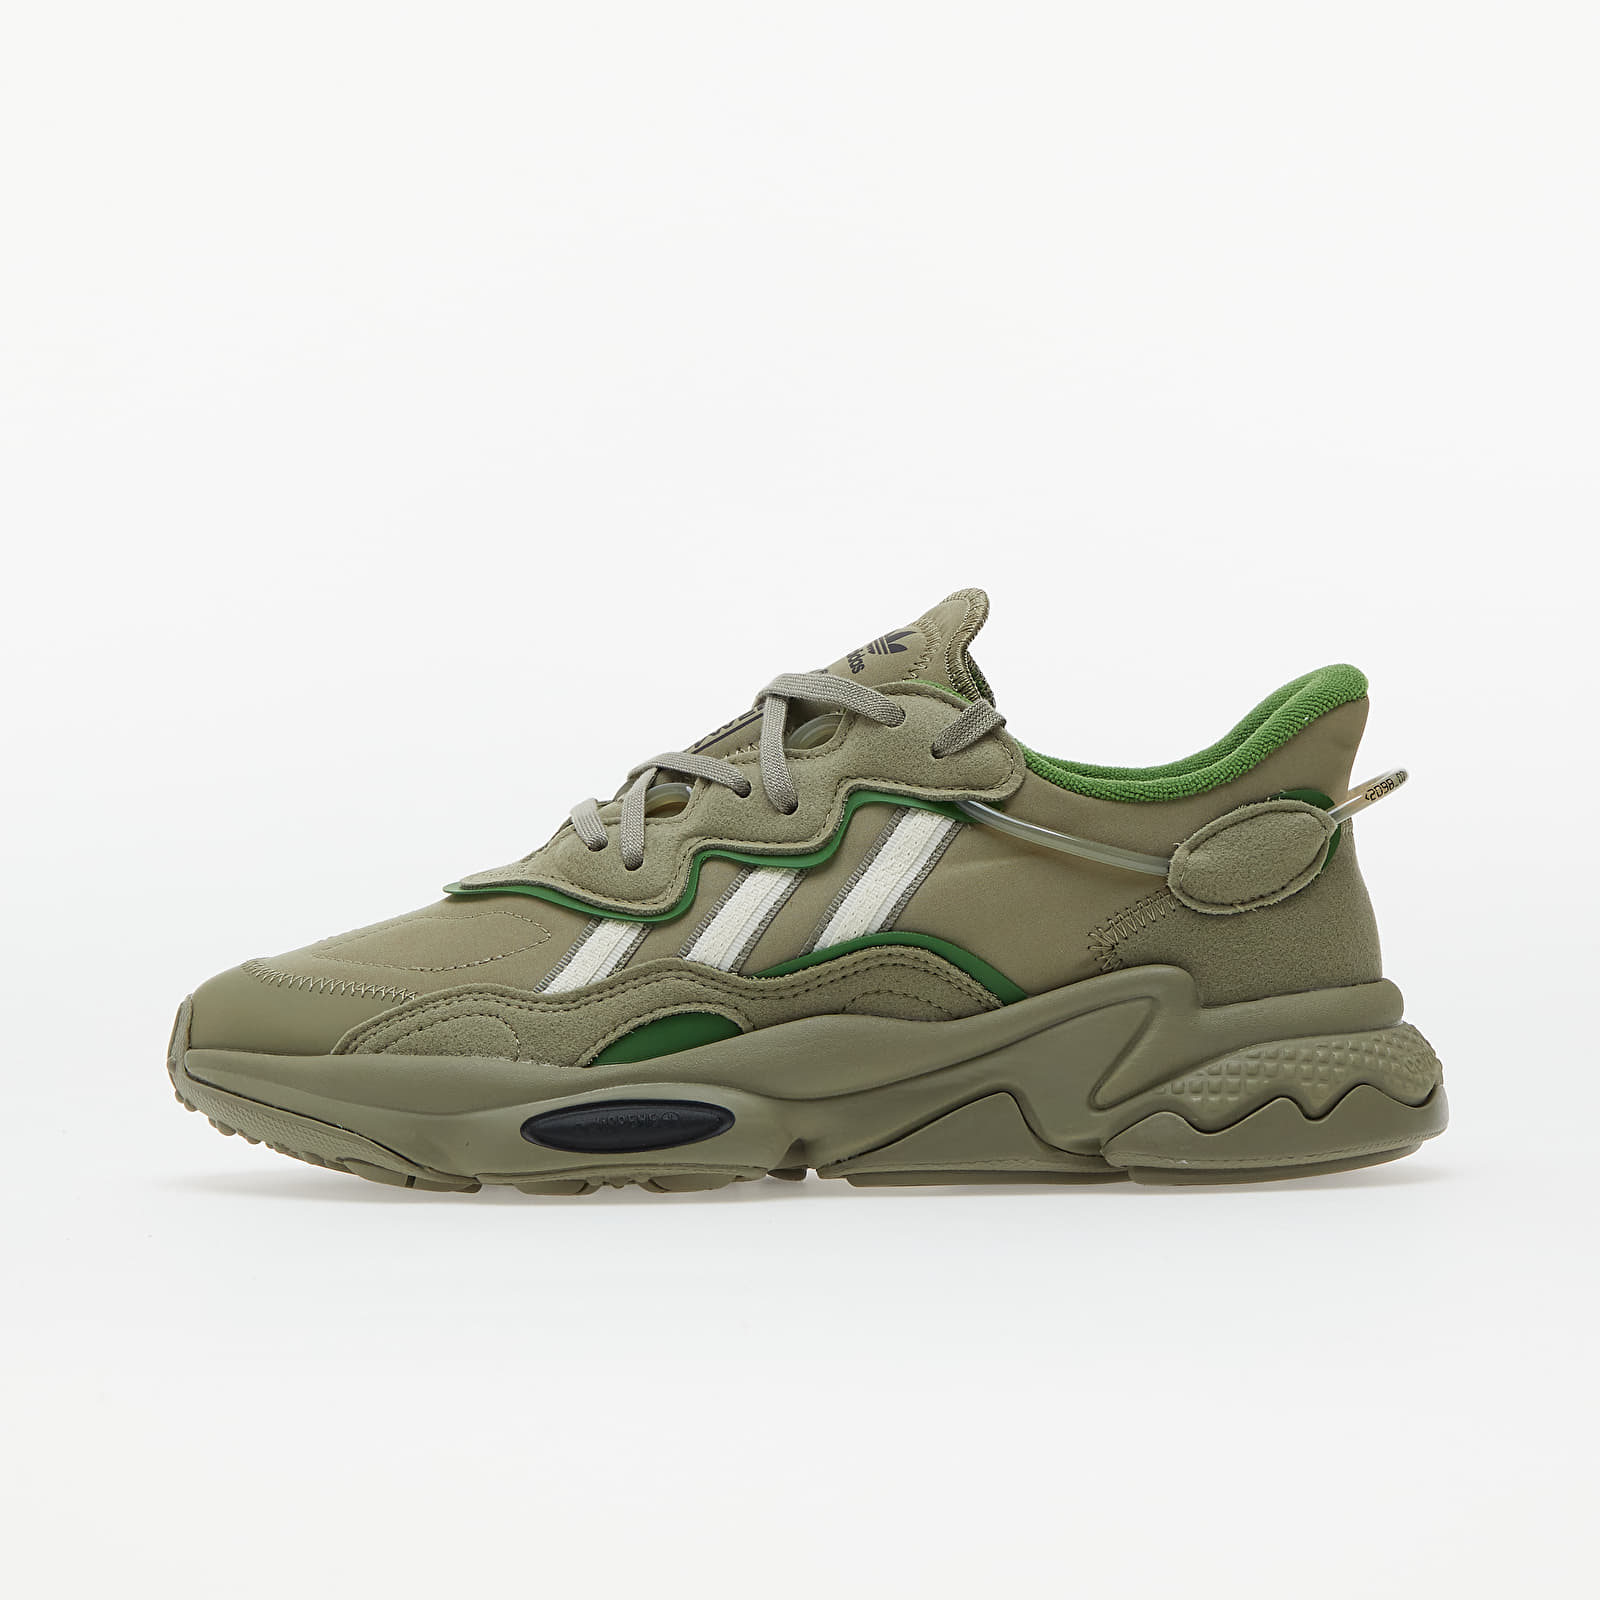 Men's shoes adidas Ozweego Orb Green/ Core White/ Core Black